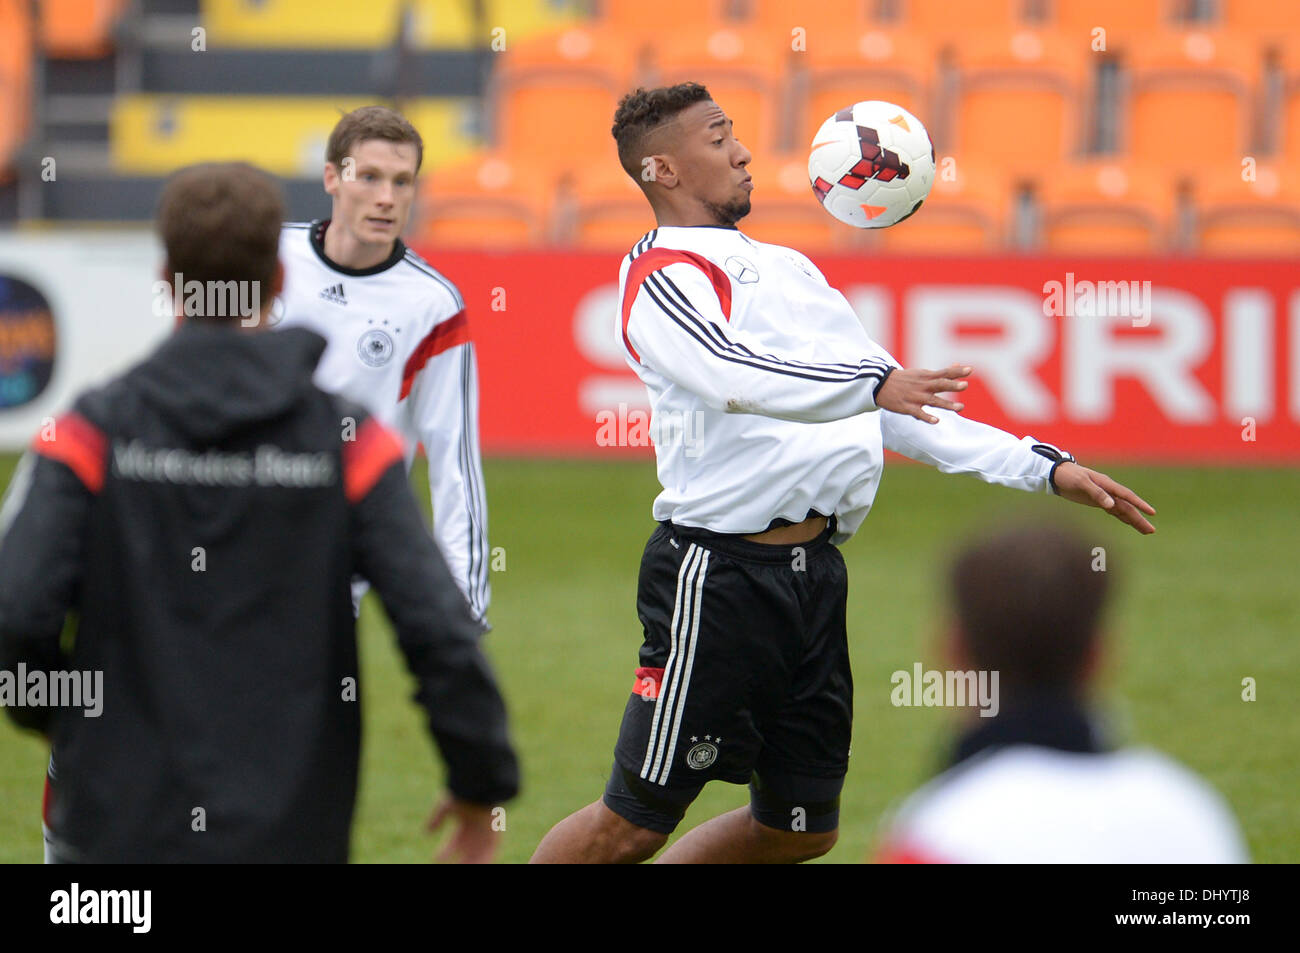 London, UK. 17th Nov, 2013. Germany's Jerome Boateng in action during a training session of the German national soccer team ahead of the friendly match against England, in London, UK, 17 November 2013. Photo: ANDREAS GEBERT/dpa/Alamy Live News Stock Photo